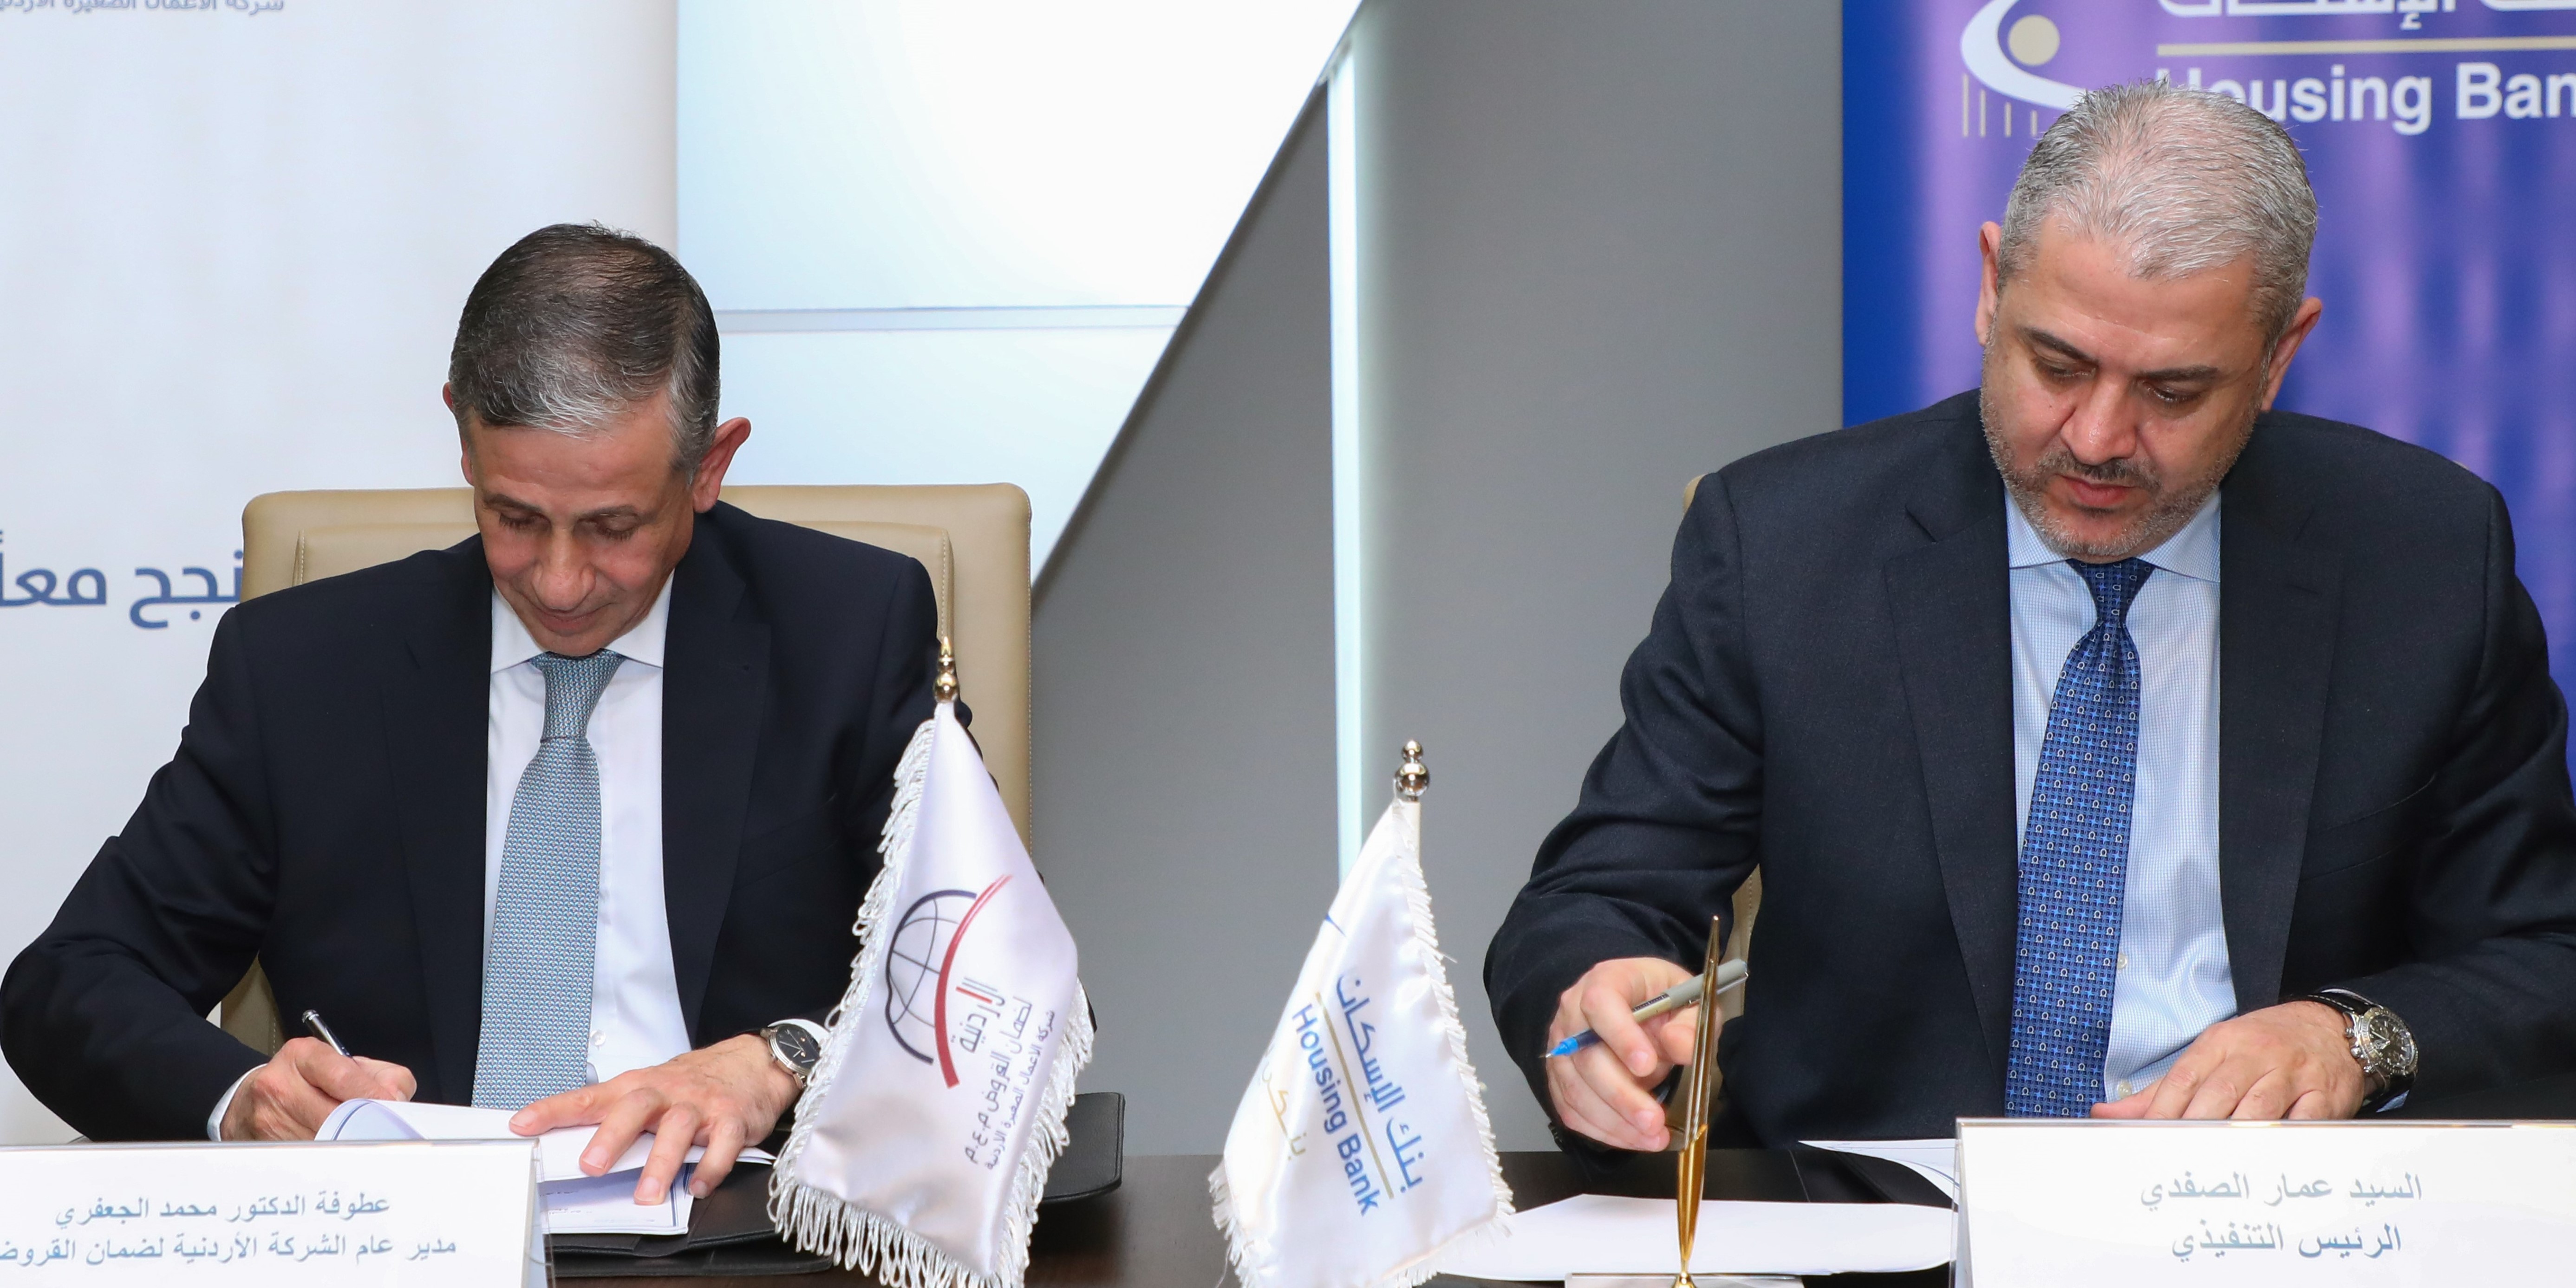 Jordan Loan Guarantee signs a "Fast Track Guarantee Agreement" with the Housing Bank to support small and medium enterprises